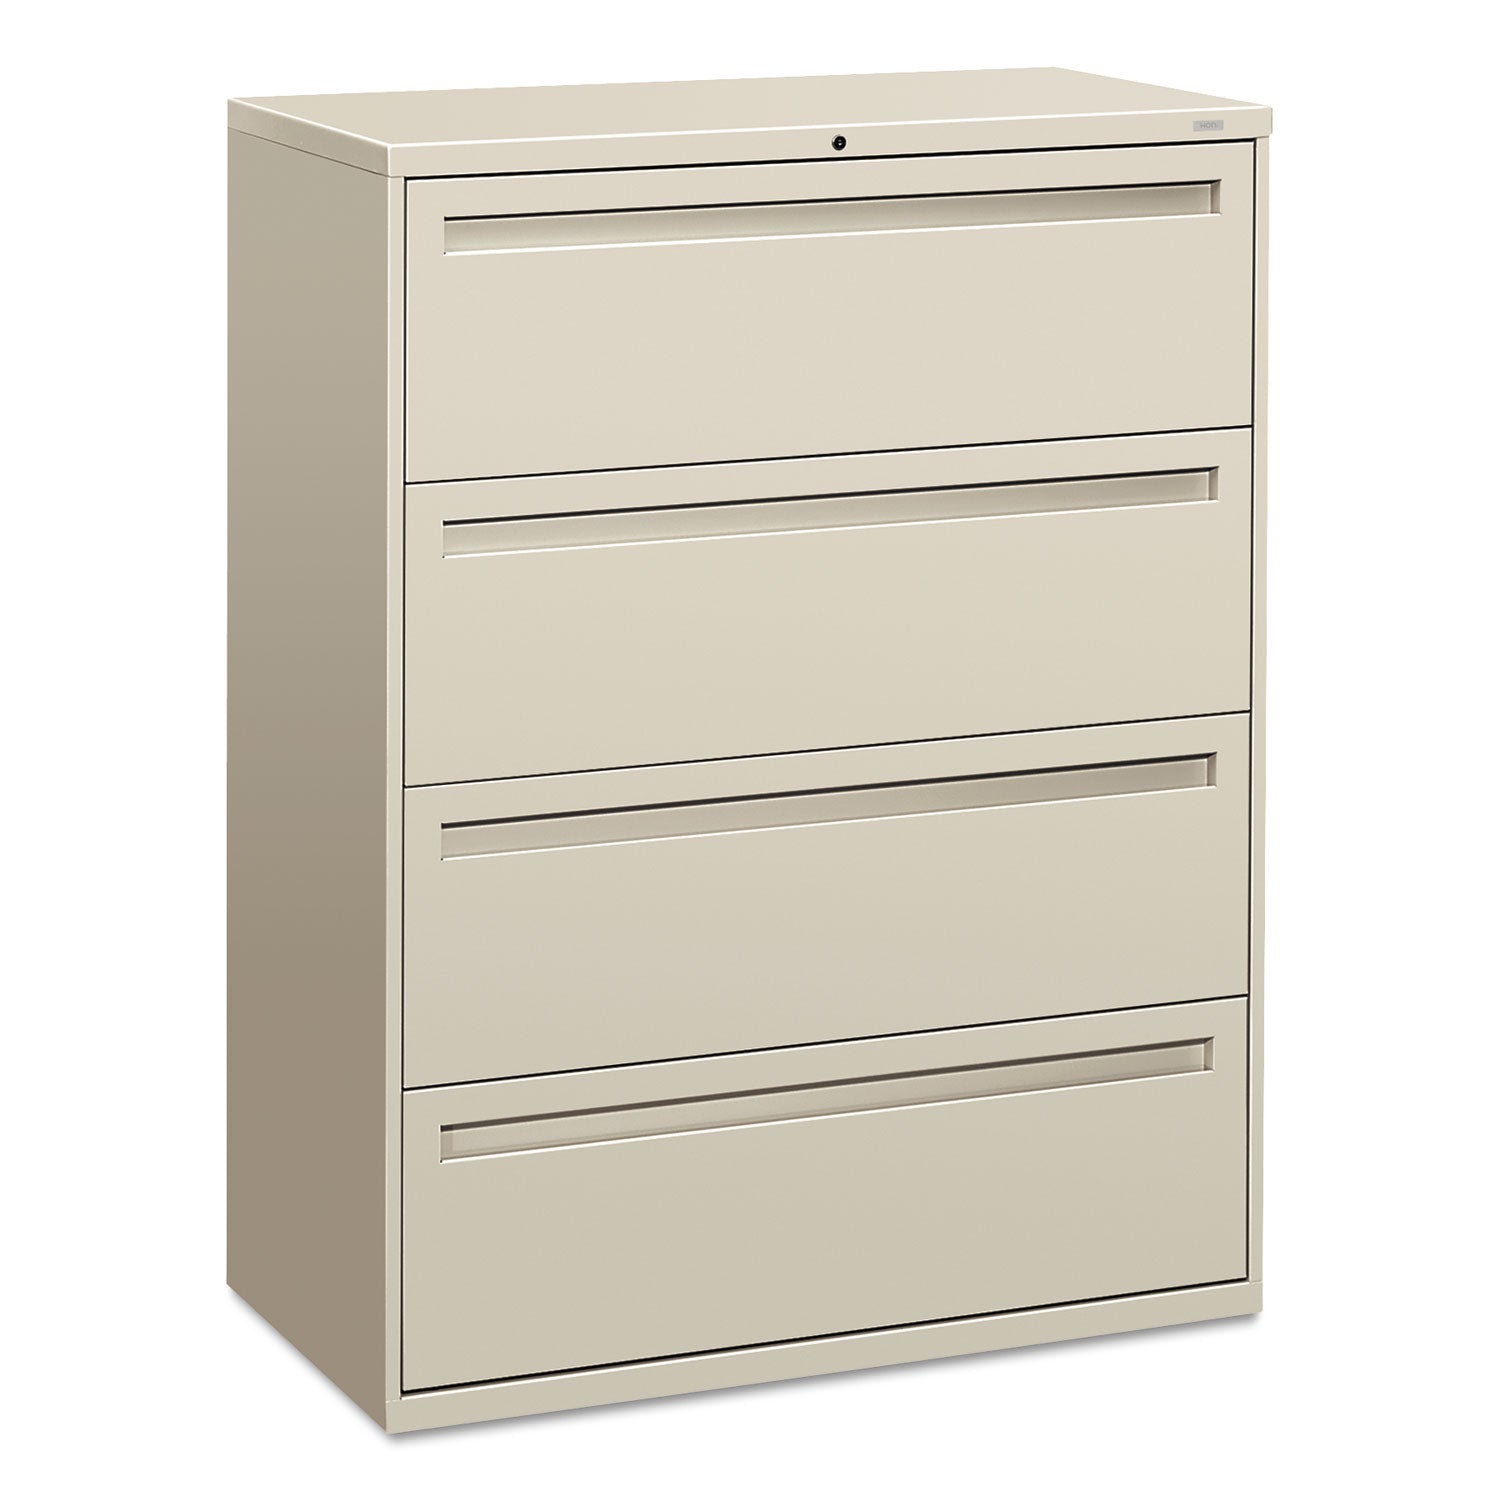 Brigade 700 Series Lateral File, 4 Legal/Letter-Size File Drawers, Light Gray, 42" x 18" x 52.5 - 